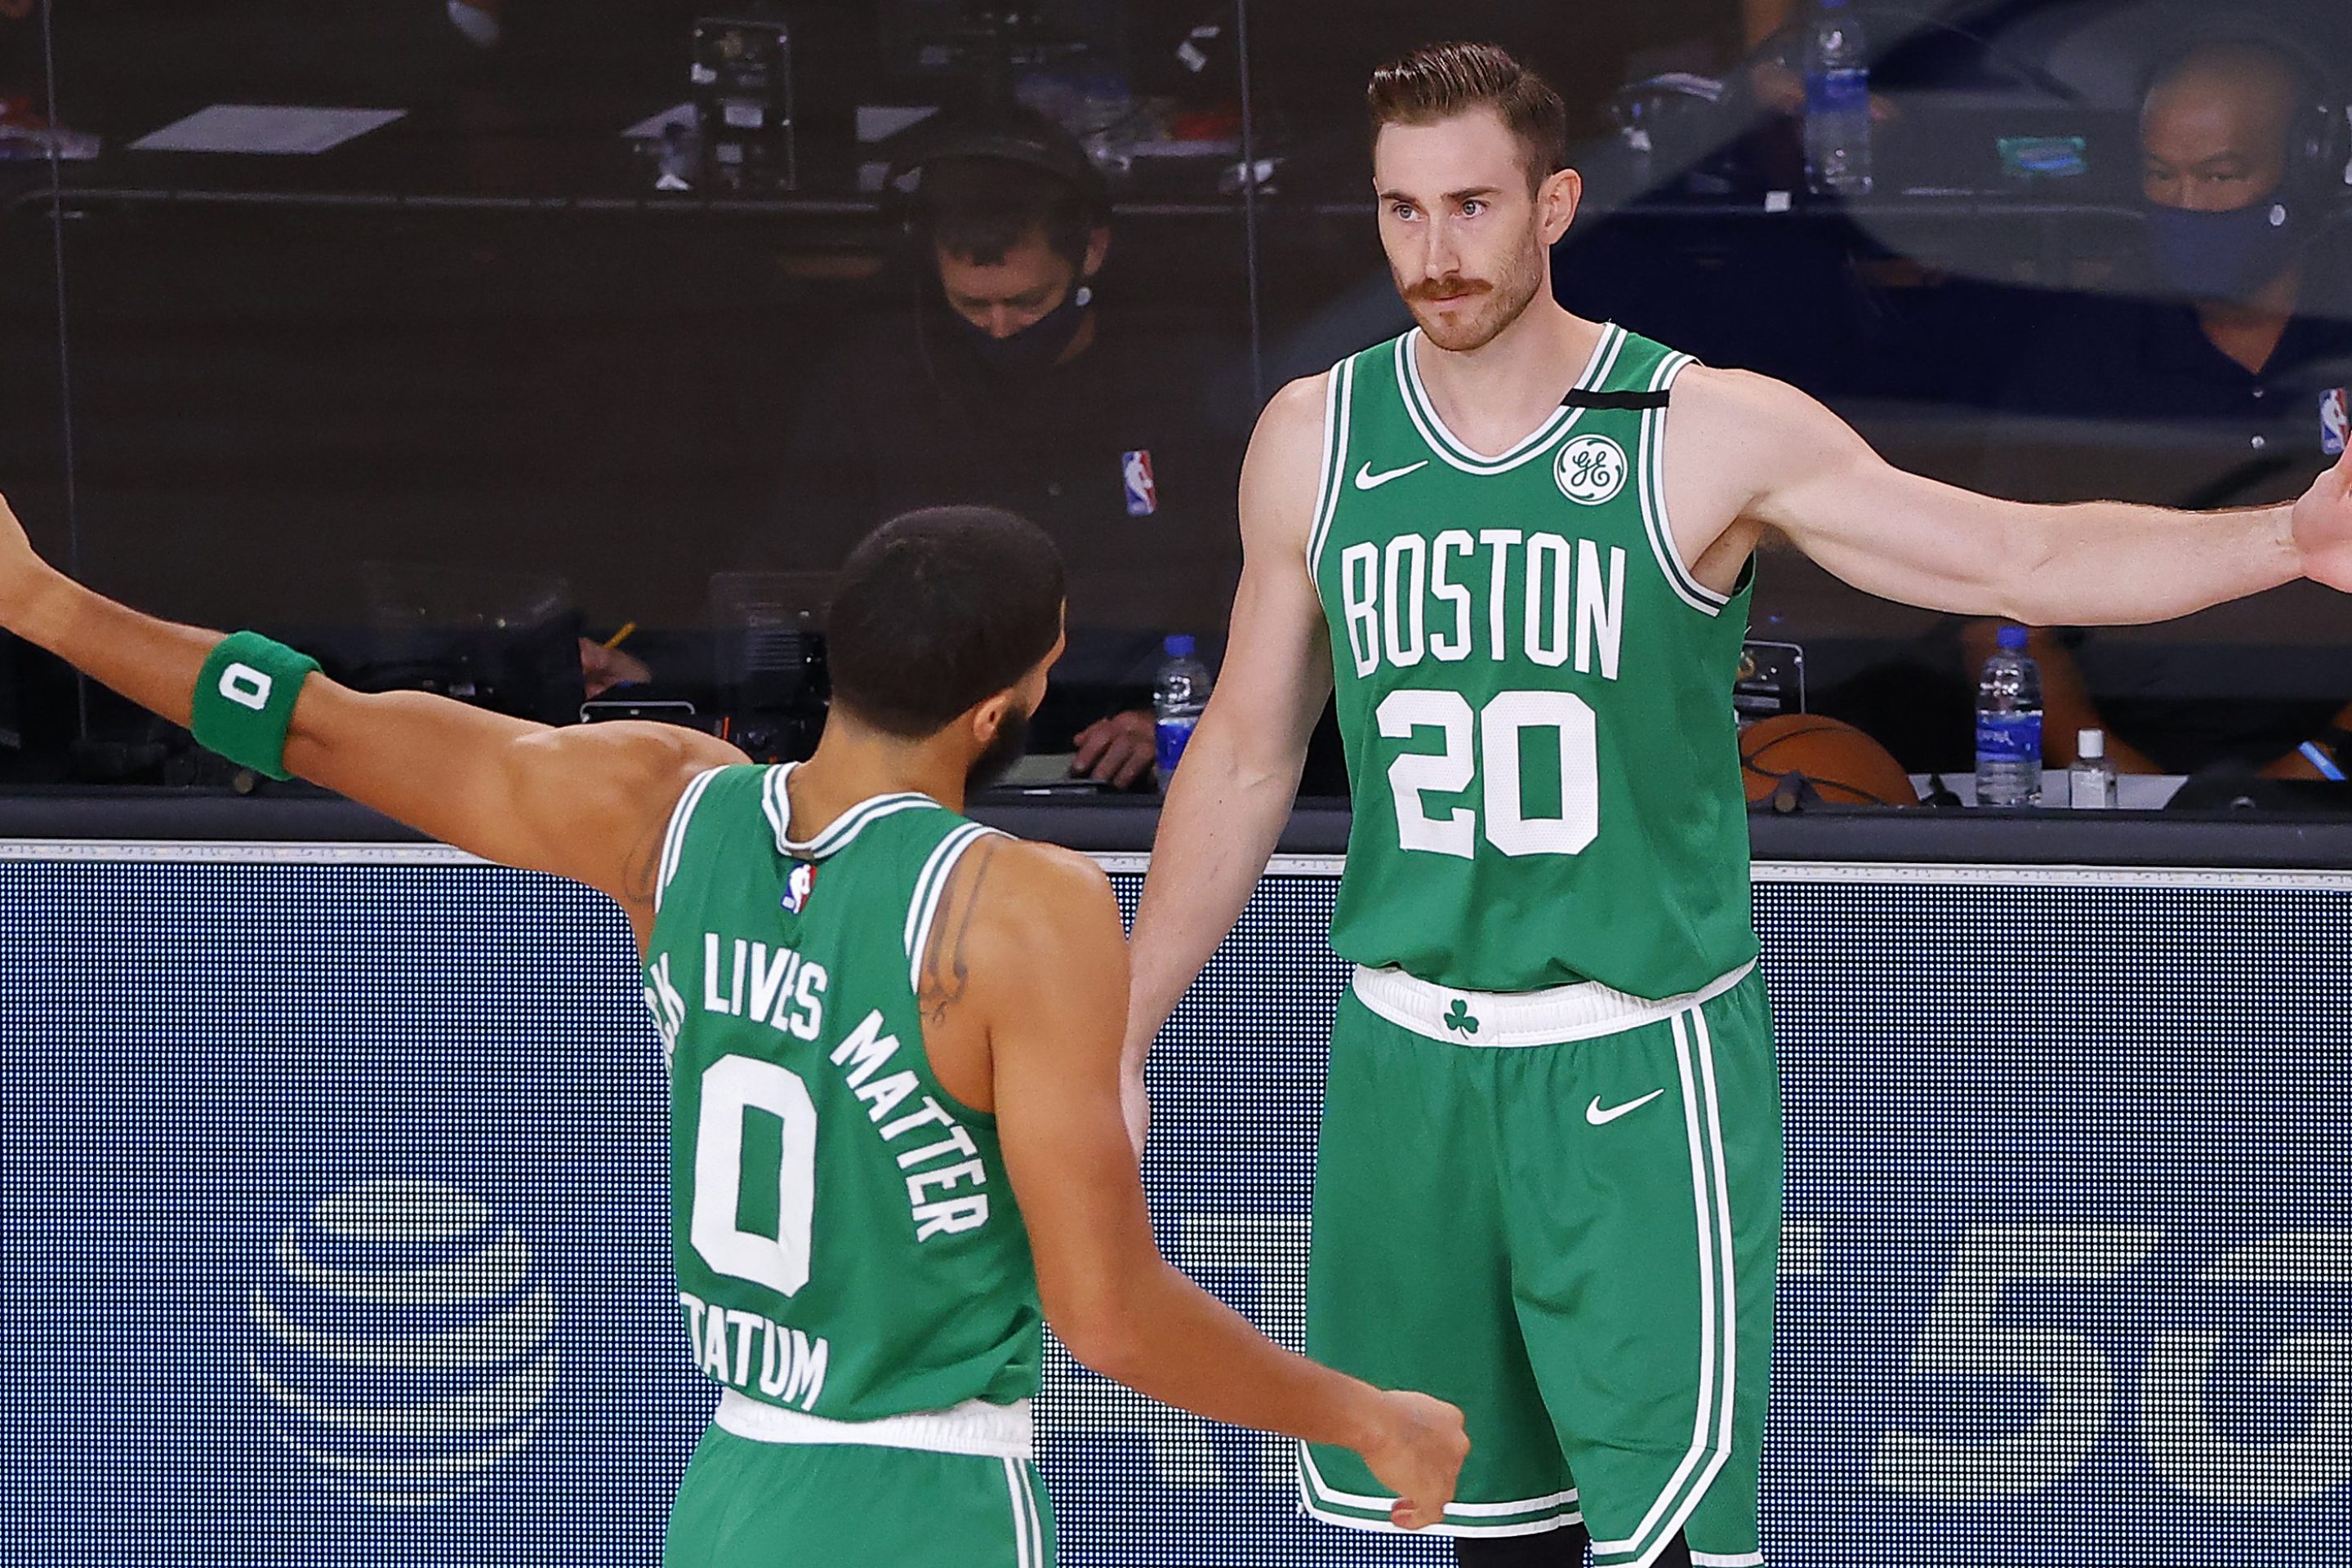 Gordon Hayward and Jayson Tatum greet each other on the sideline of a Celtics playoff game.